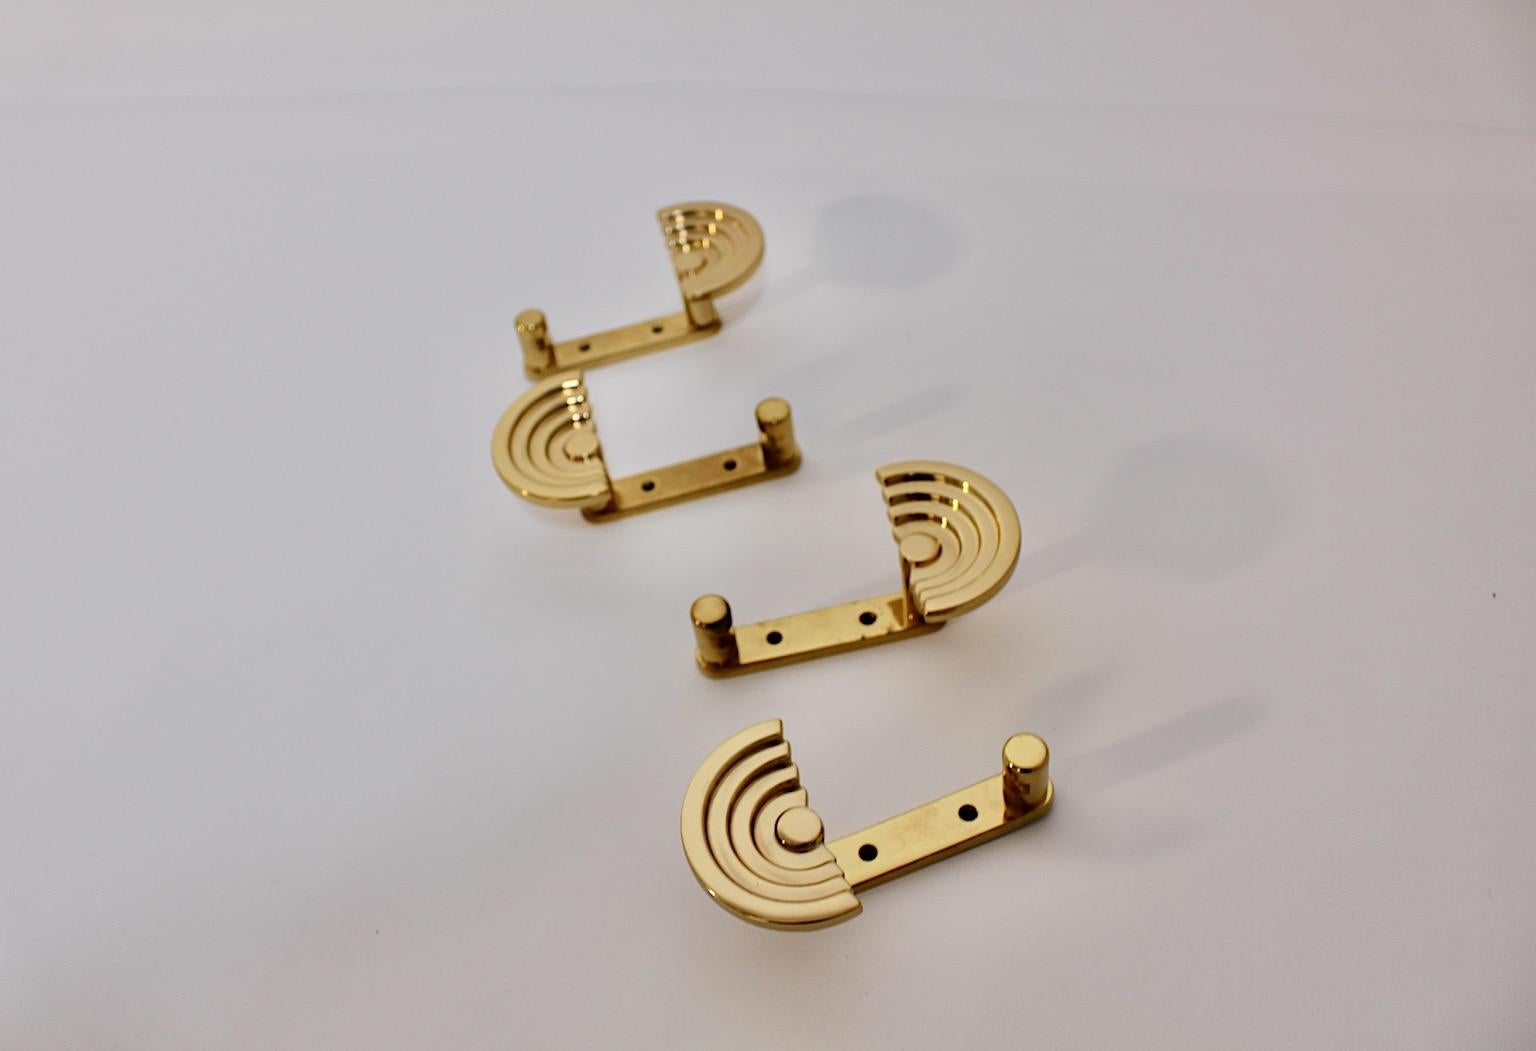 Ettore Sottsass Vintage Brass Four Wall Hooks or Coat Hooks circa 1985 Italy For Sale 1